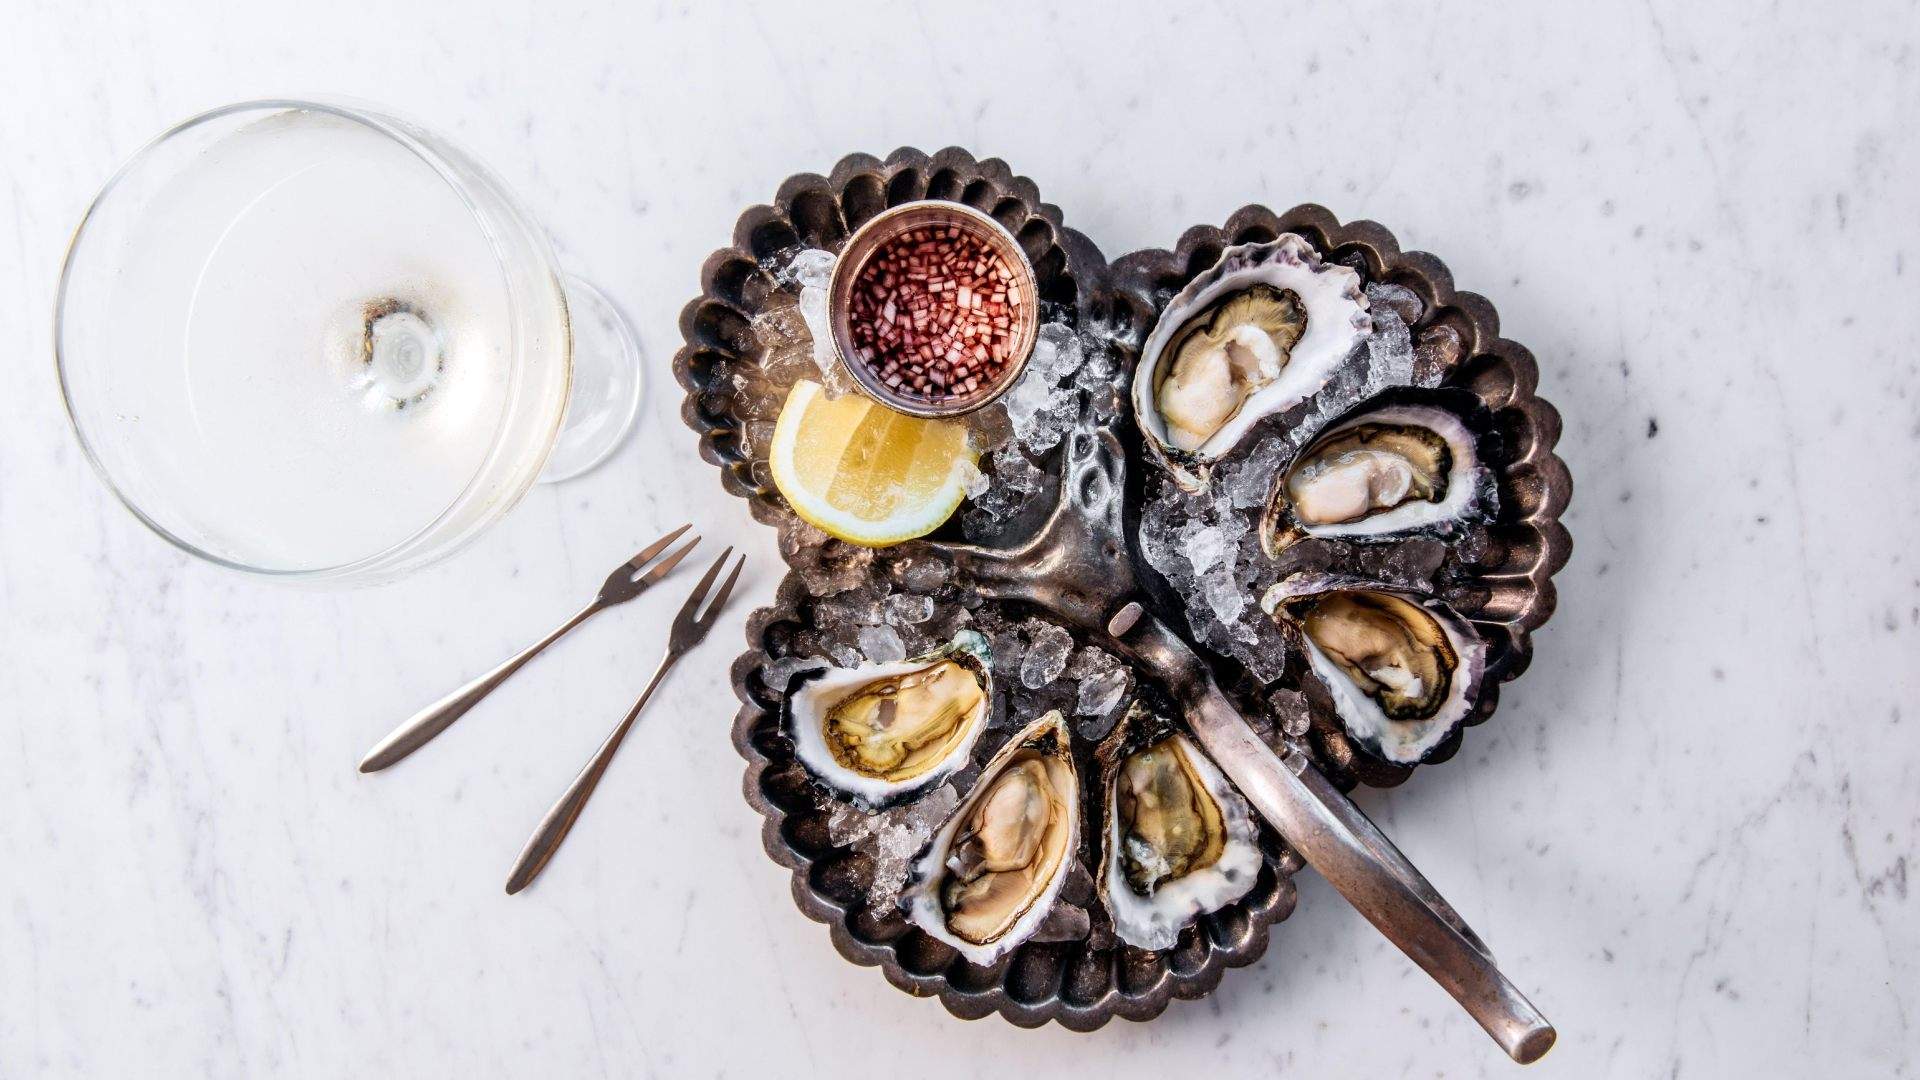 The Sydney Collective's New Waterfront French Restaurant Whalebridge Is Arriving in Circular Quay Later This Month